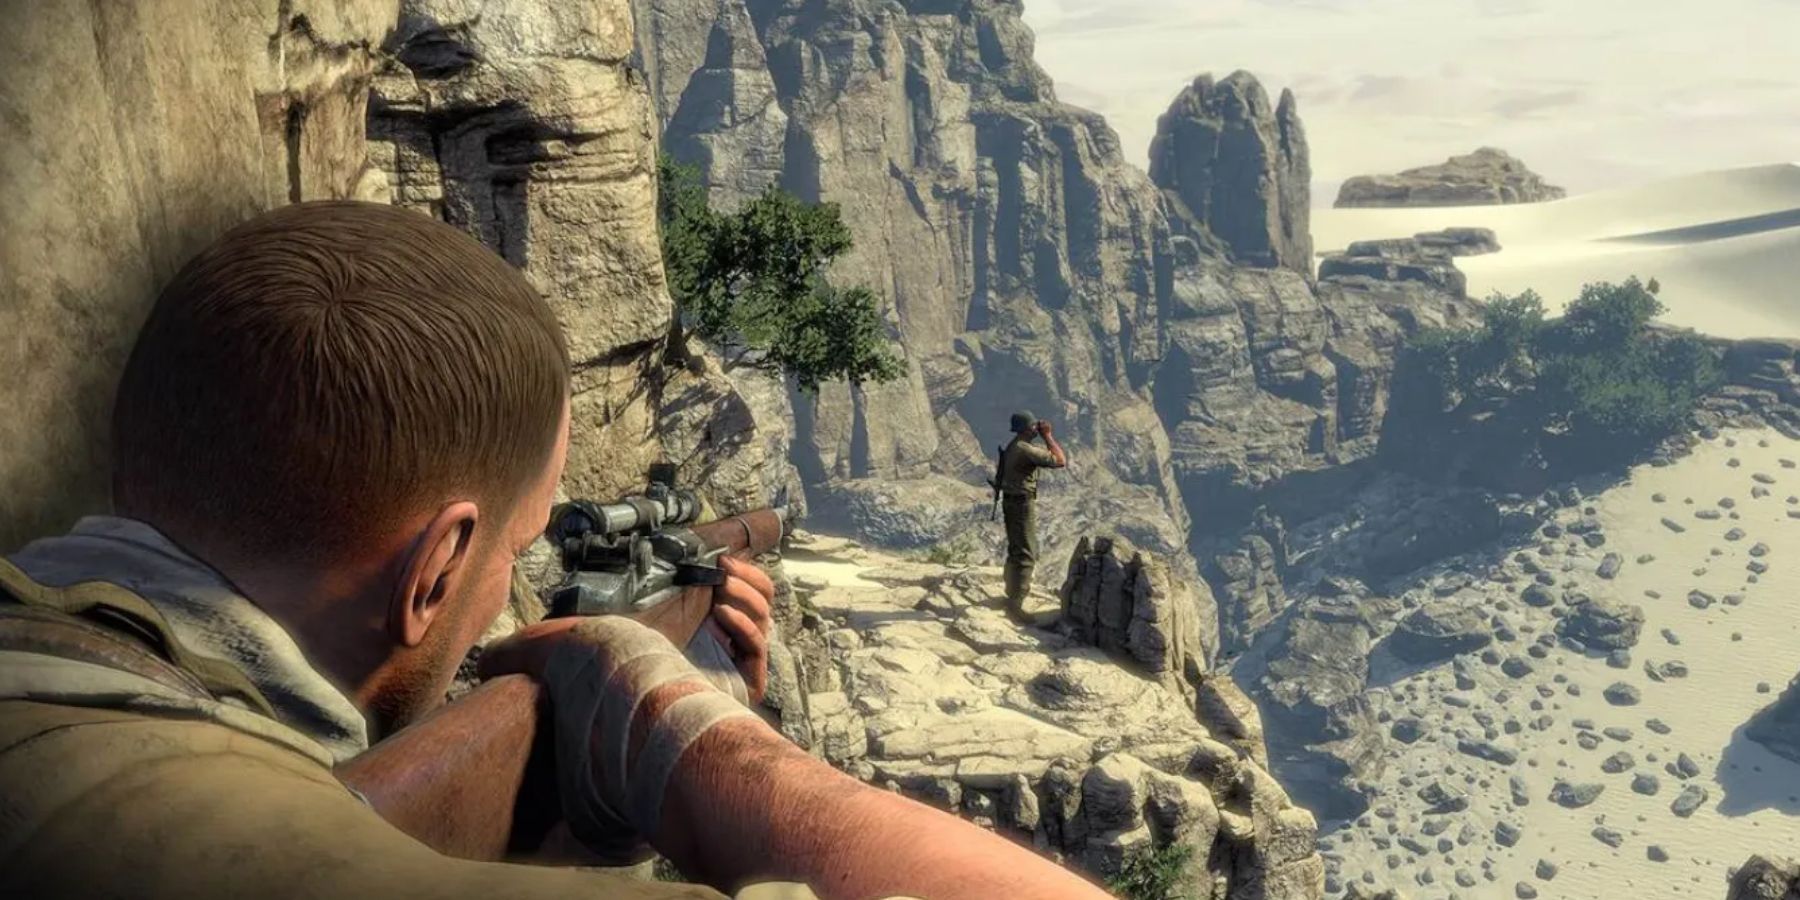 Sniper Elite 3 - using a sniper rifle ready to take down an enemy